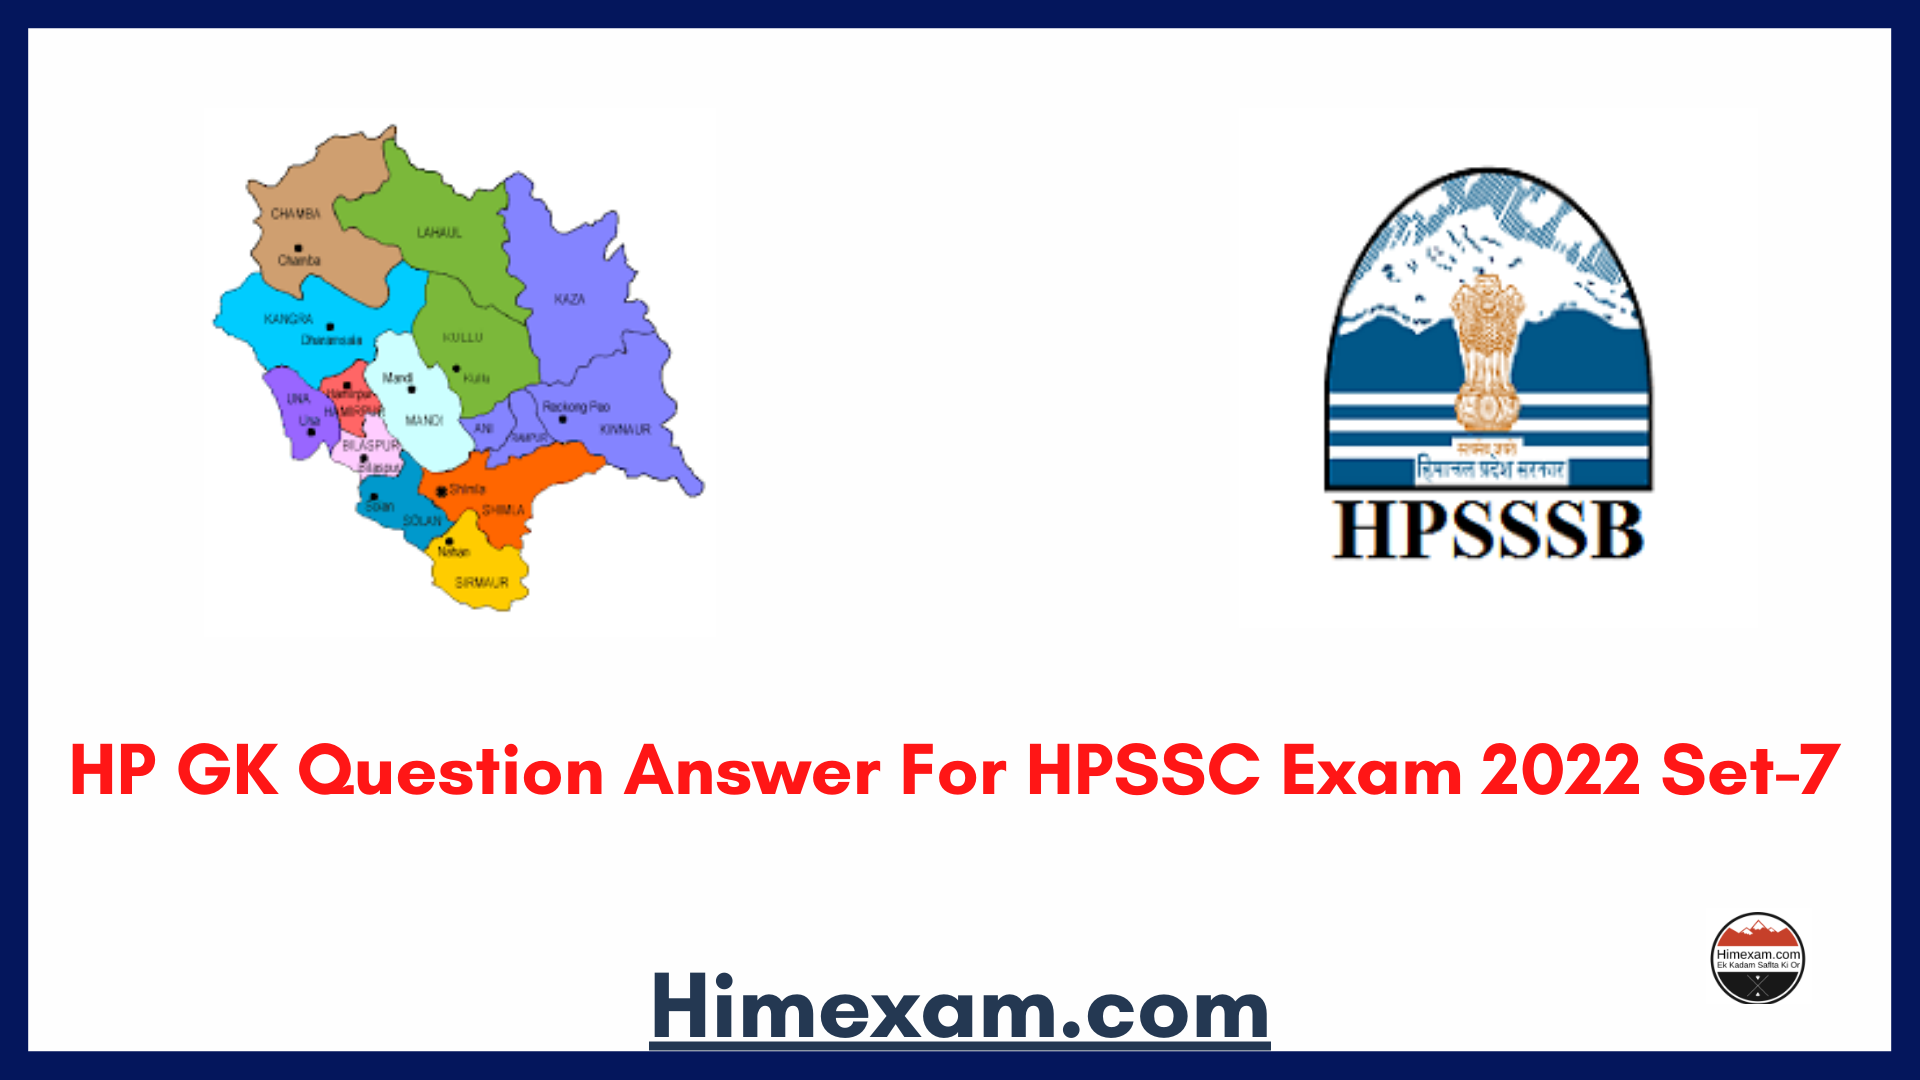 HP GK Question Answer For HPSSC Exam 2022 Set-7